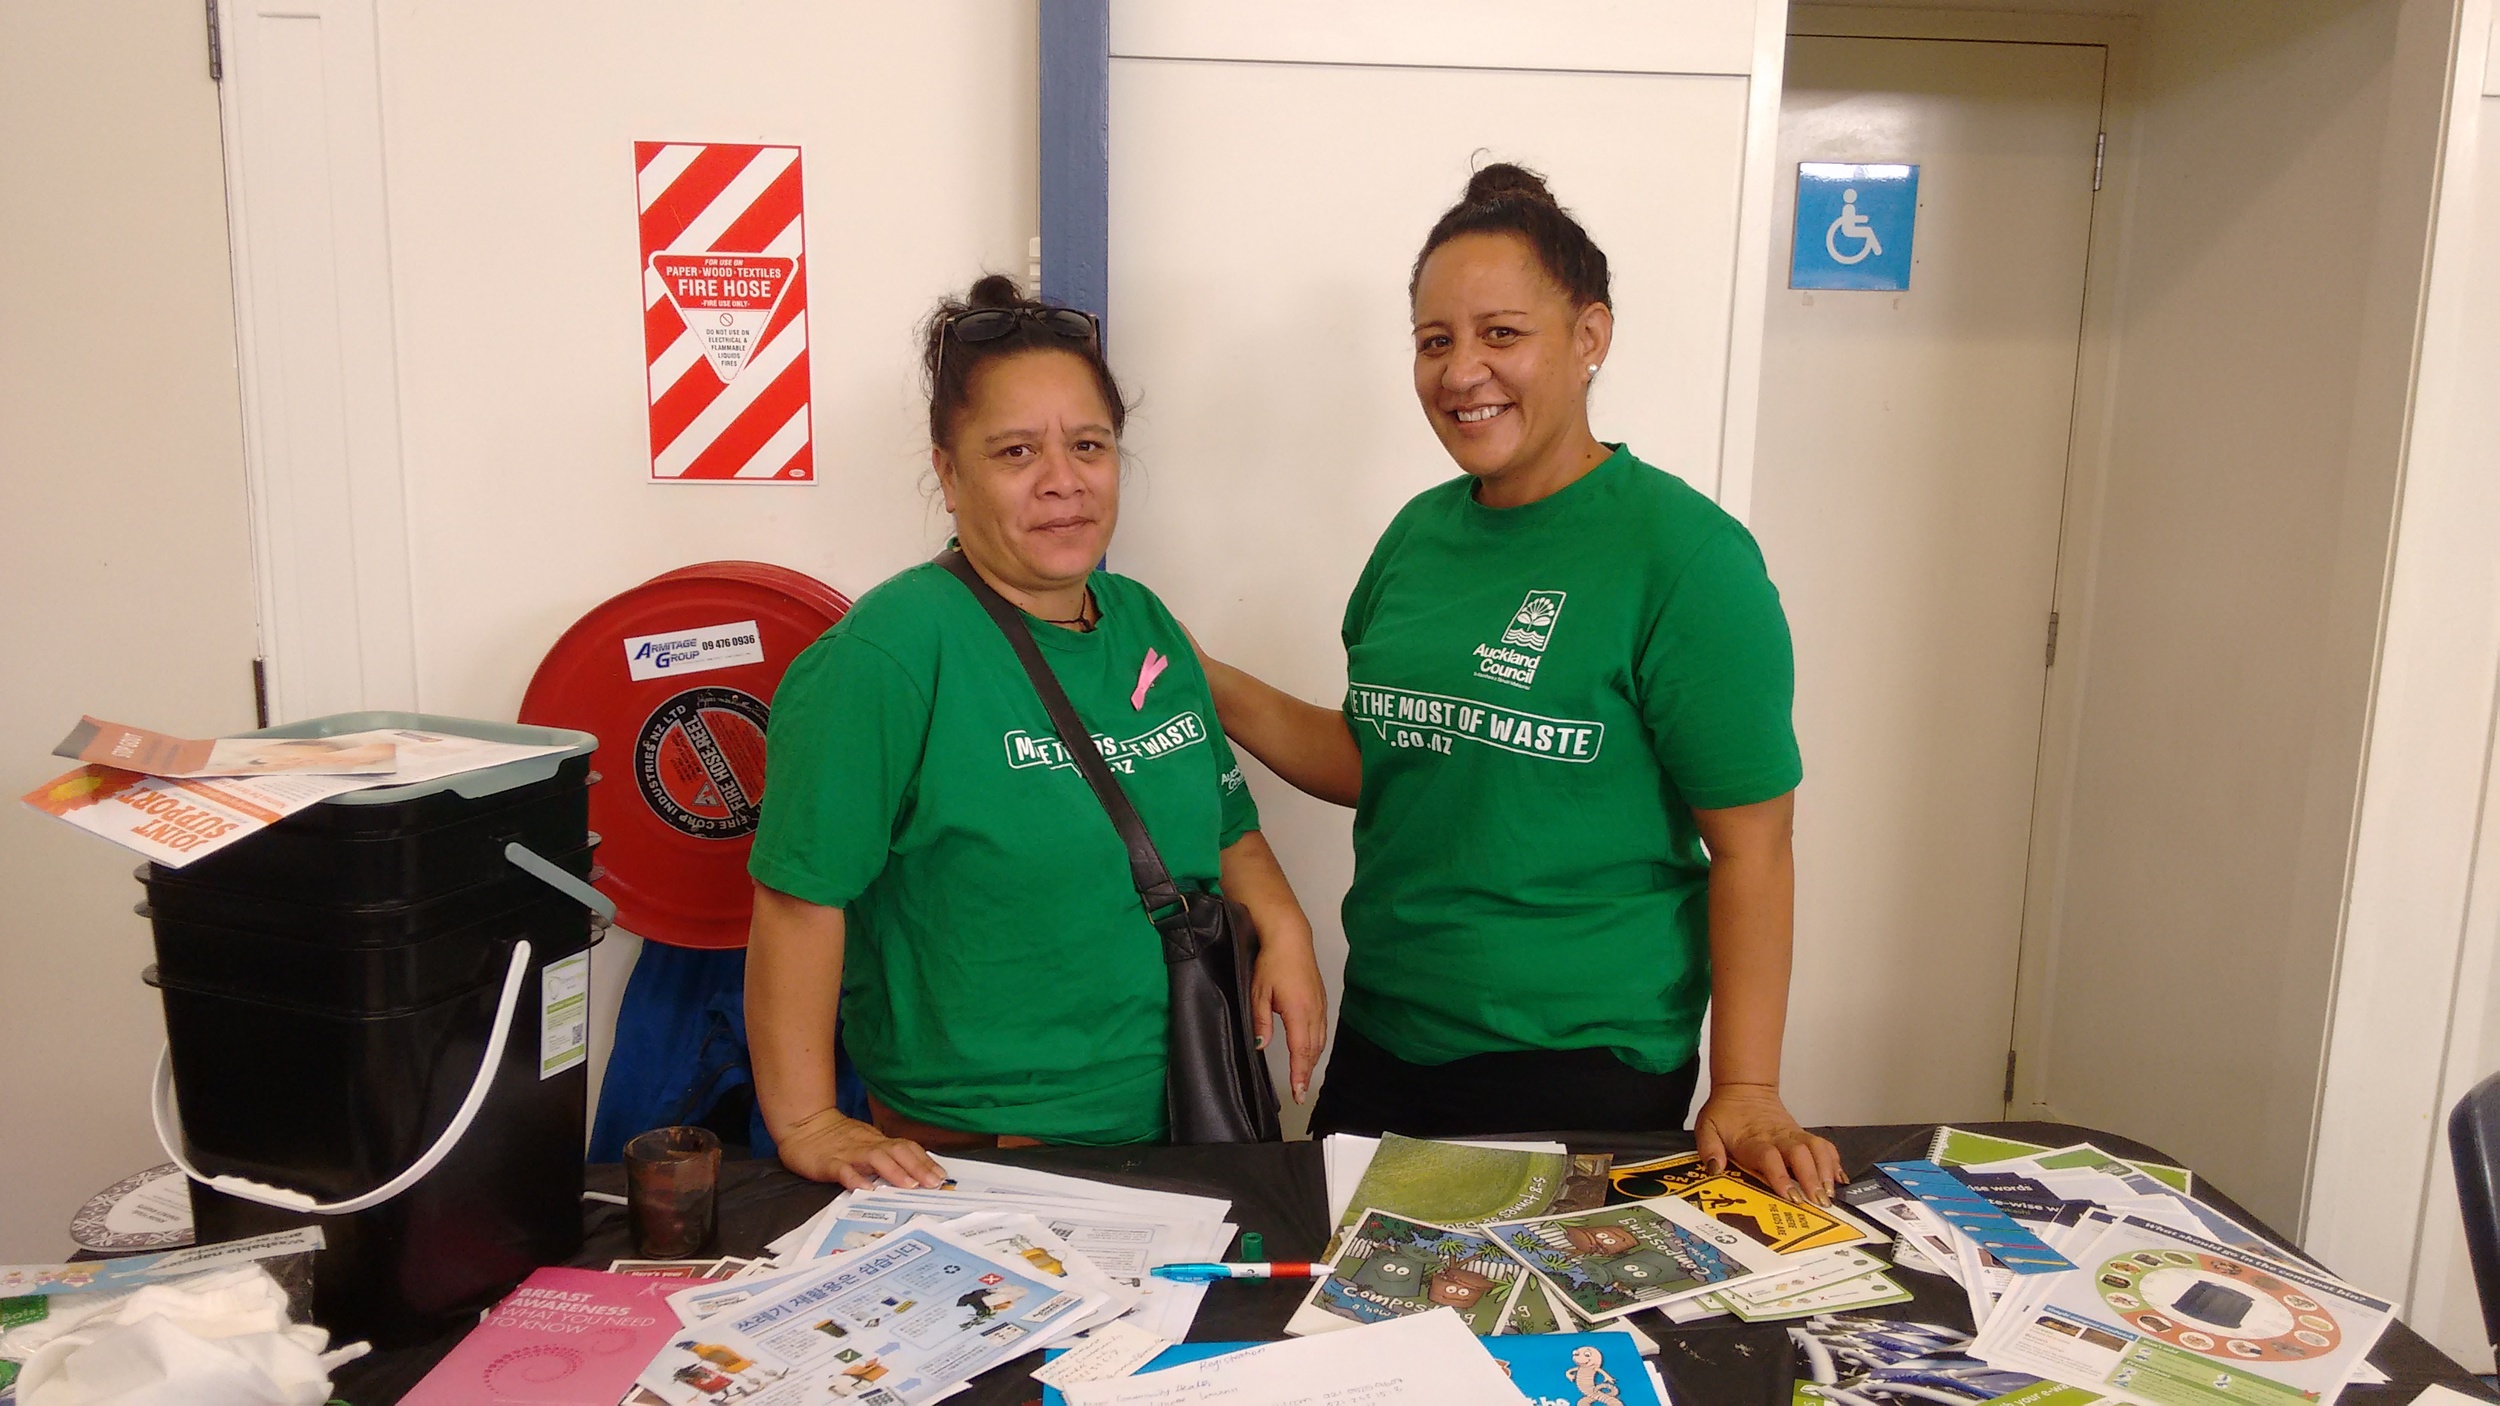  Shatna and Naomi manning the WRAP stall at the Riverside event - Hauora Day 